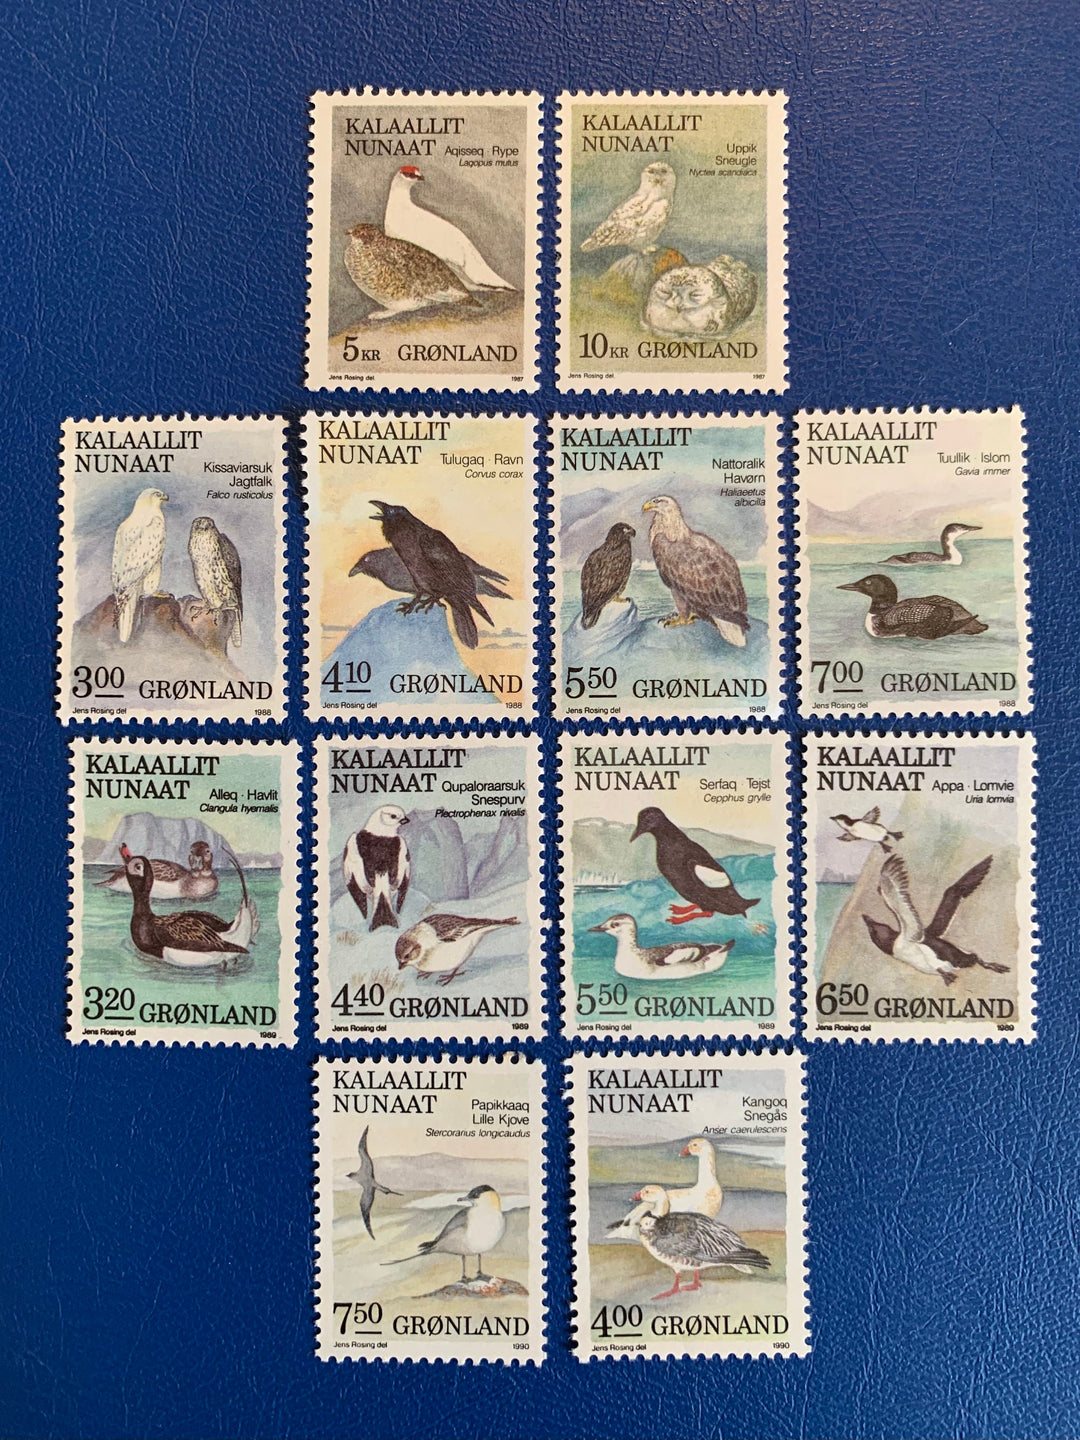 Greenland - Original Vintage Postage Stamps- 1986-90 - Bird Series - for the collector, artist or crafter